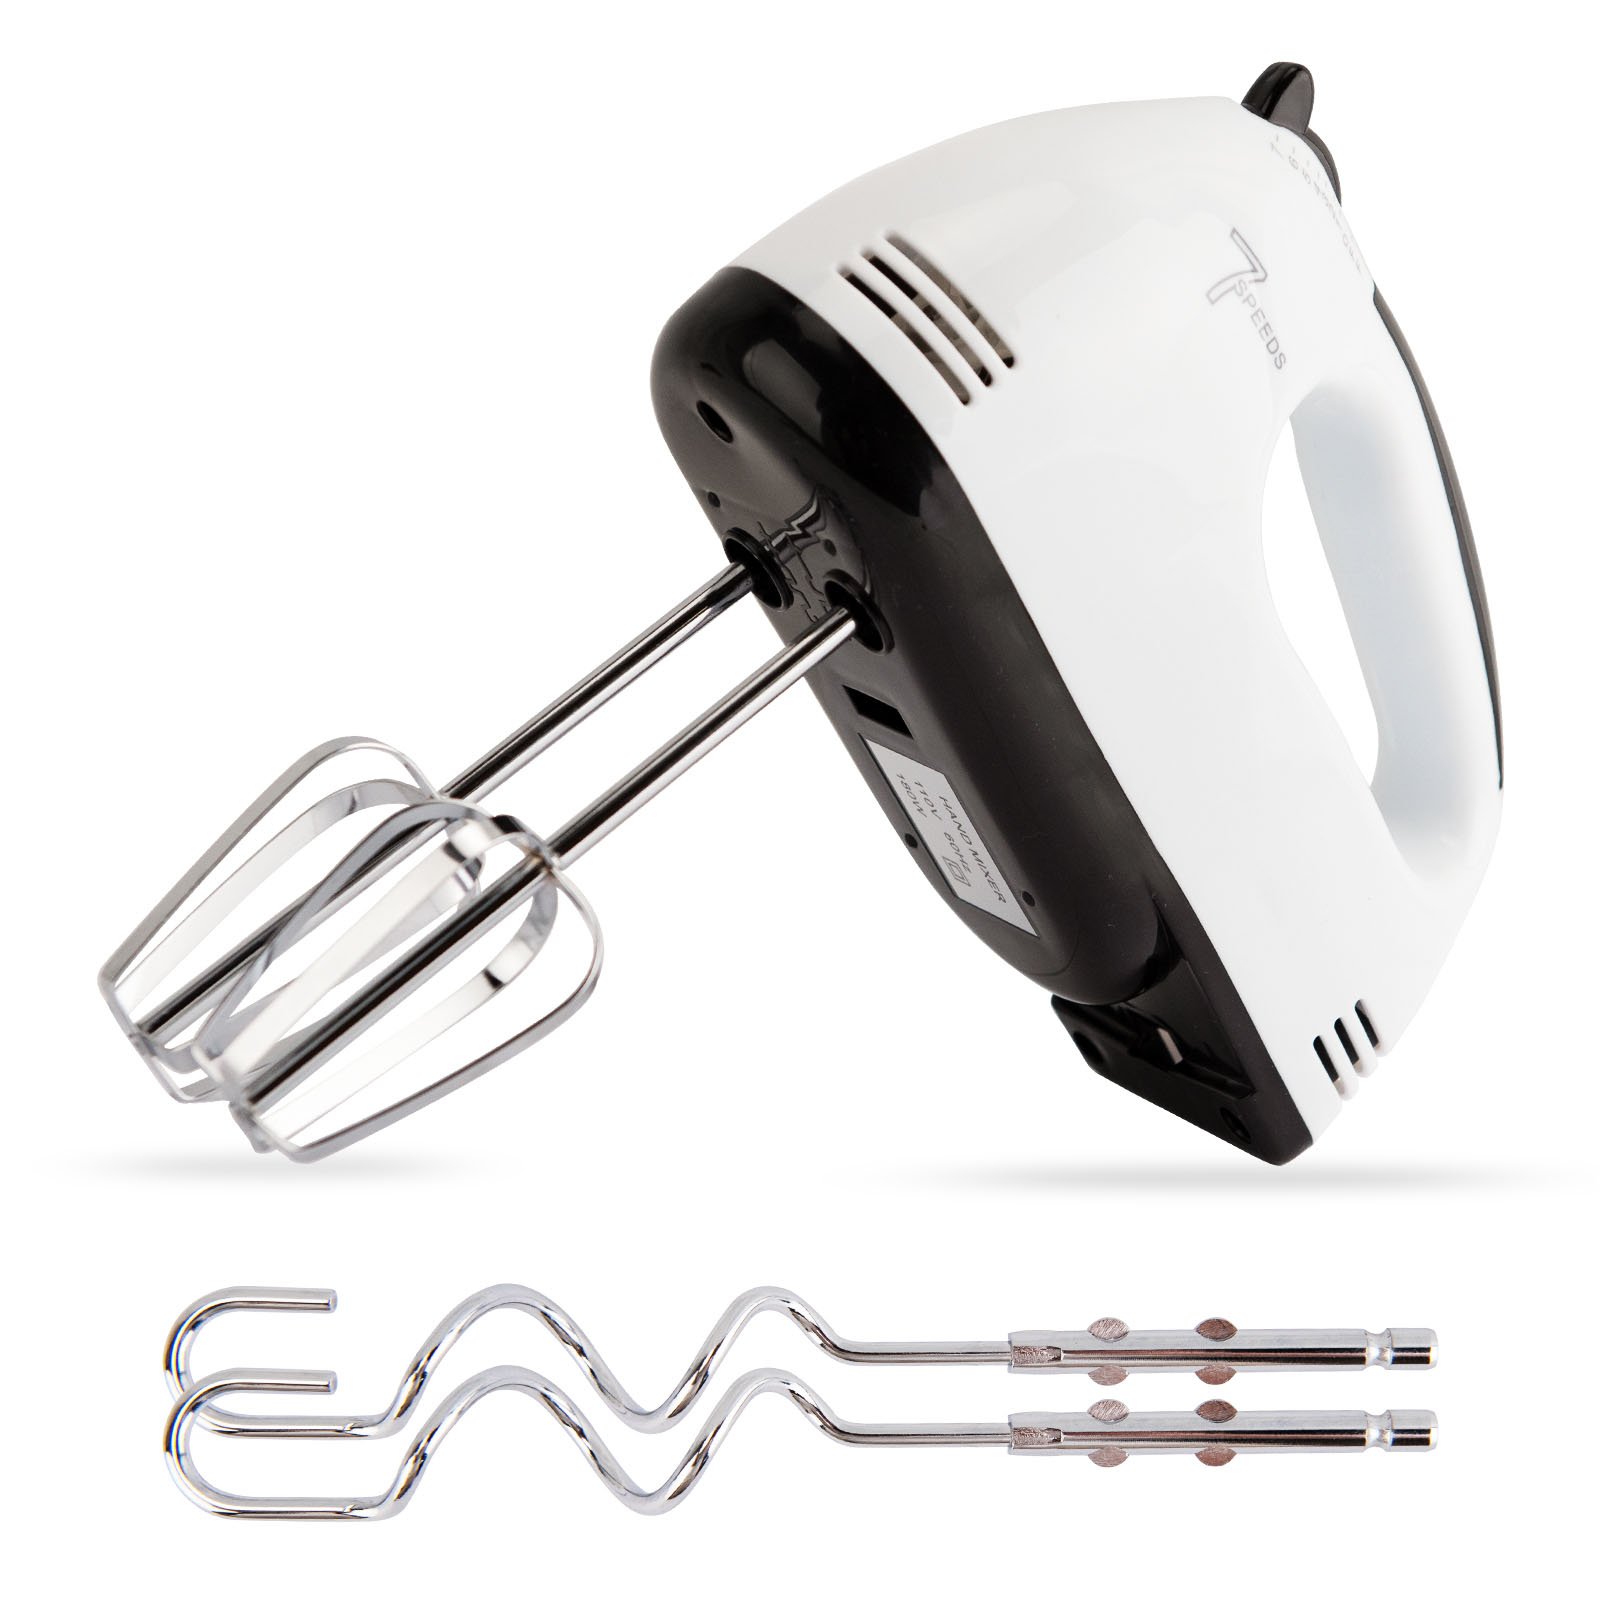 Reppkyh Stainless Steel Turbo Electric Whisk Mini Hand Mixer with 2 Pieces  Beaters and Dough Hooks price in UAE,  UAE